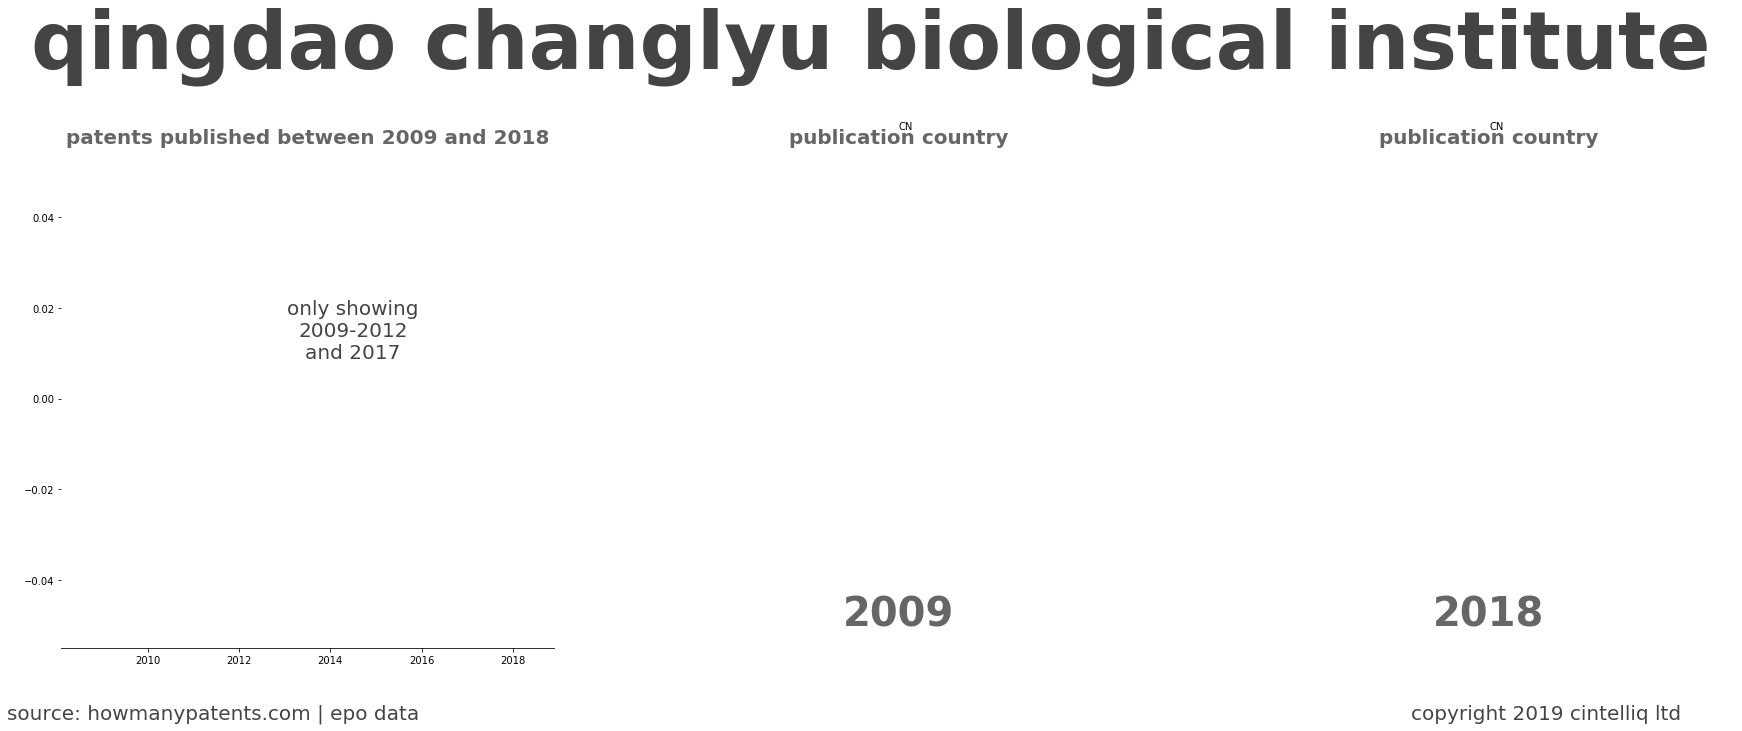 summary of patents for Qingdao Changlyu Biological Institute